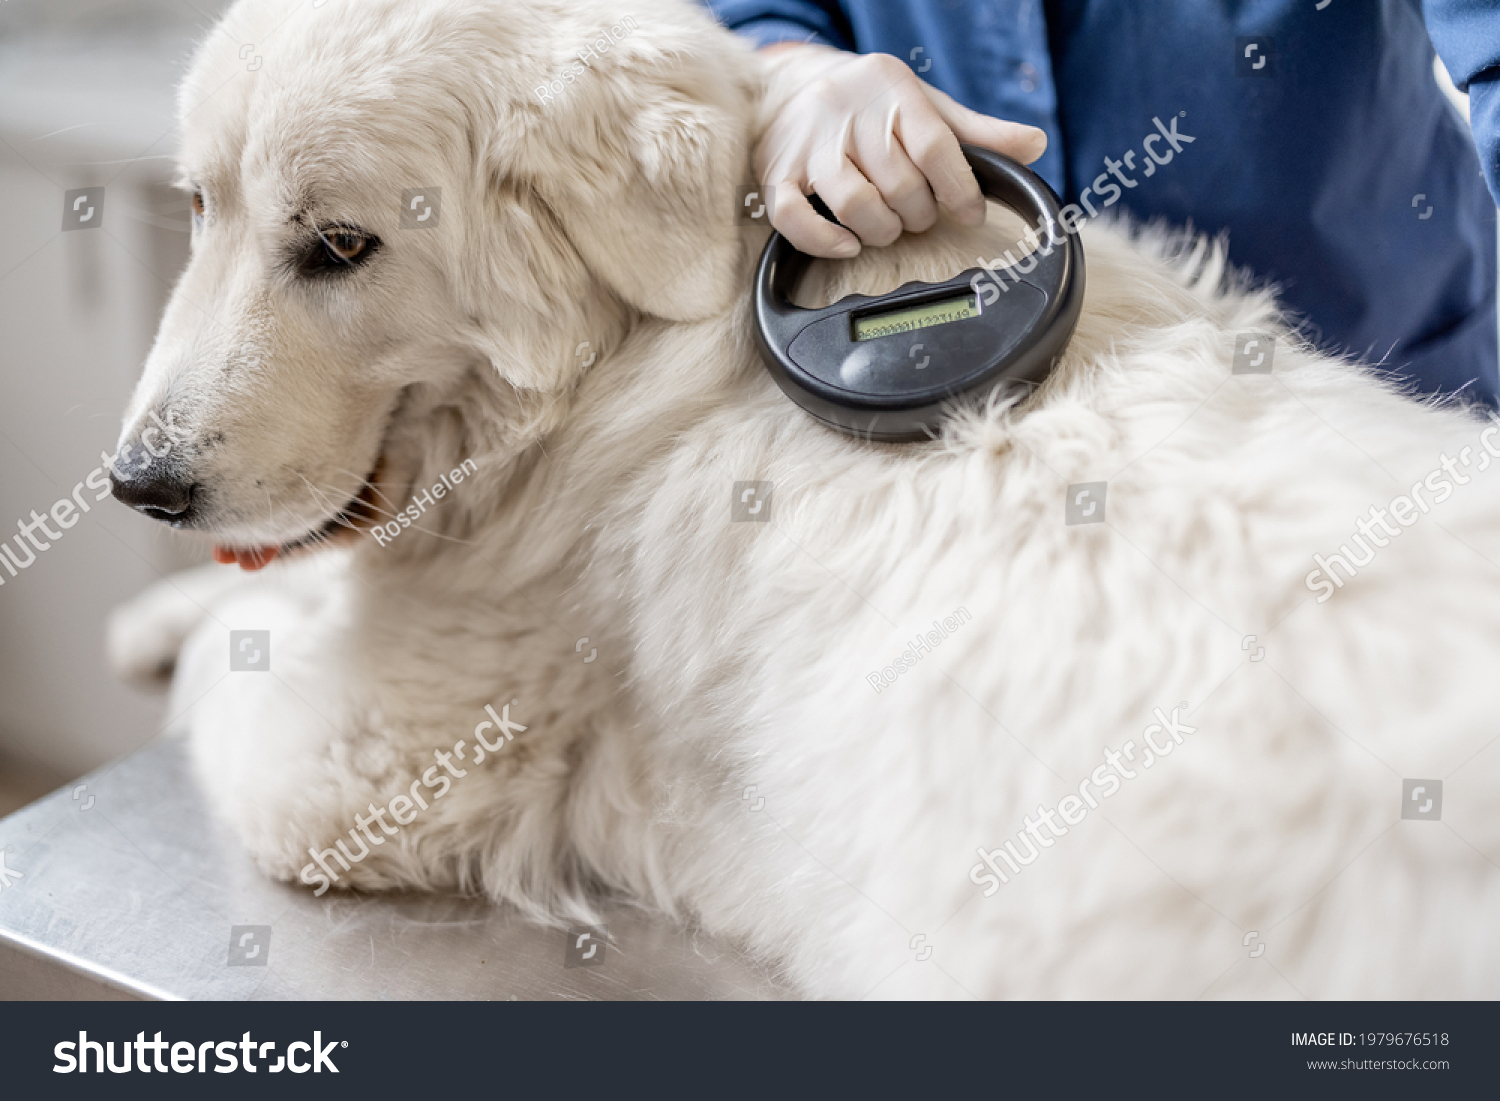 Veterinarian checking microchip implant under sheepdog dog skin in vet clinic with scanner device. Registration and indentification of pets. Animal id passport. #1979676518